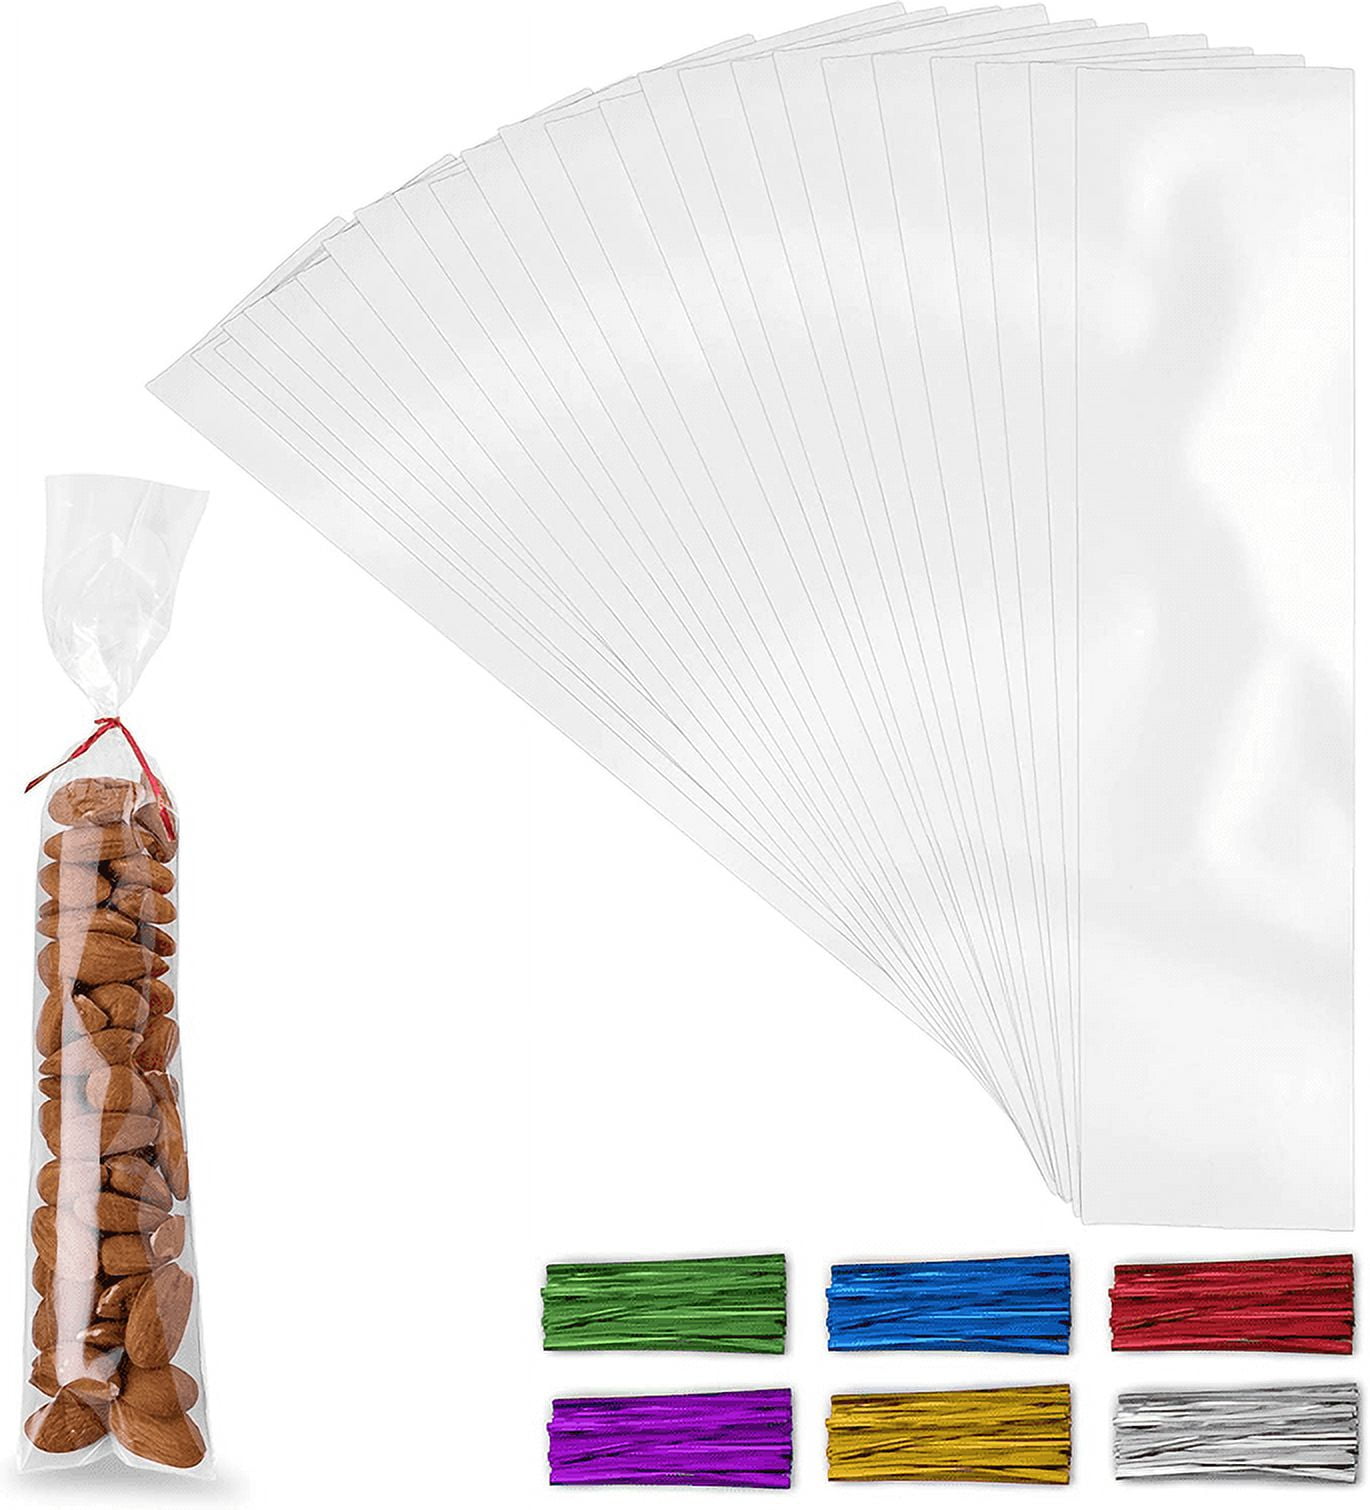 Amazon.com: TATTI 200 Large Cello Bags 9x12 with Twist Ties Poly Treat Bags  for Gift Wrapping, 1.4mils Thickness OPP Flat Plastic Bags for Christmas,  Weddings, Thank you Gift Basket Supplies : Health